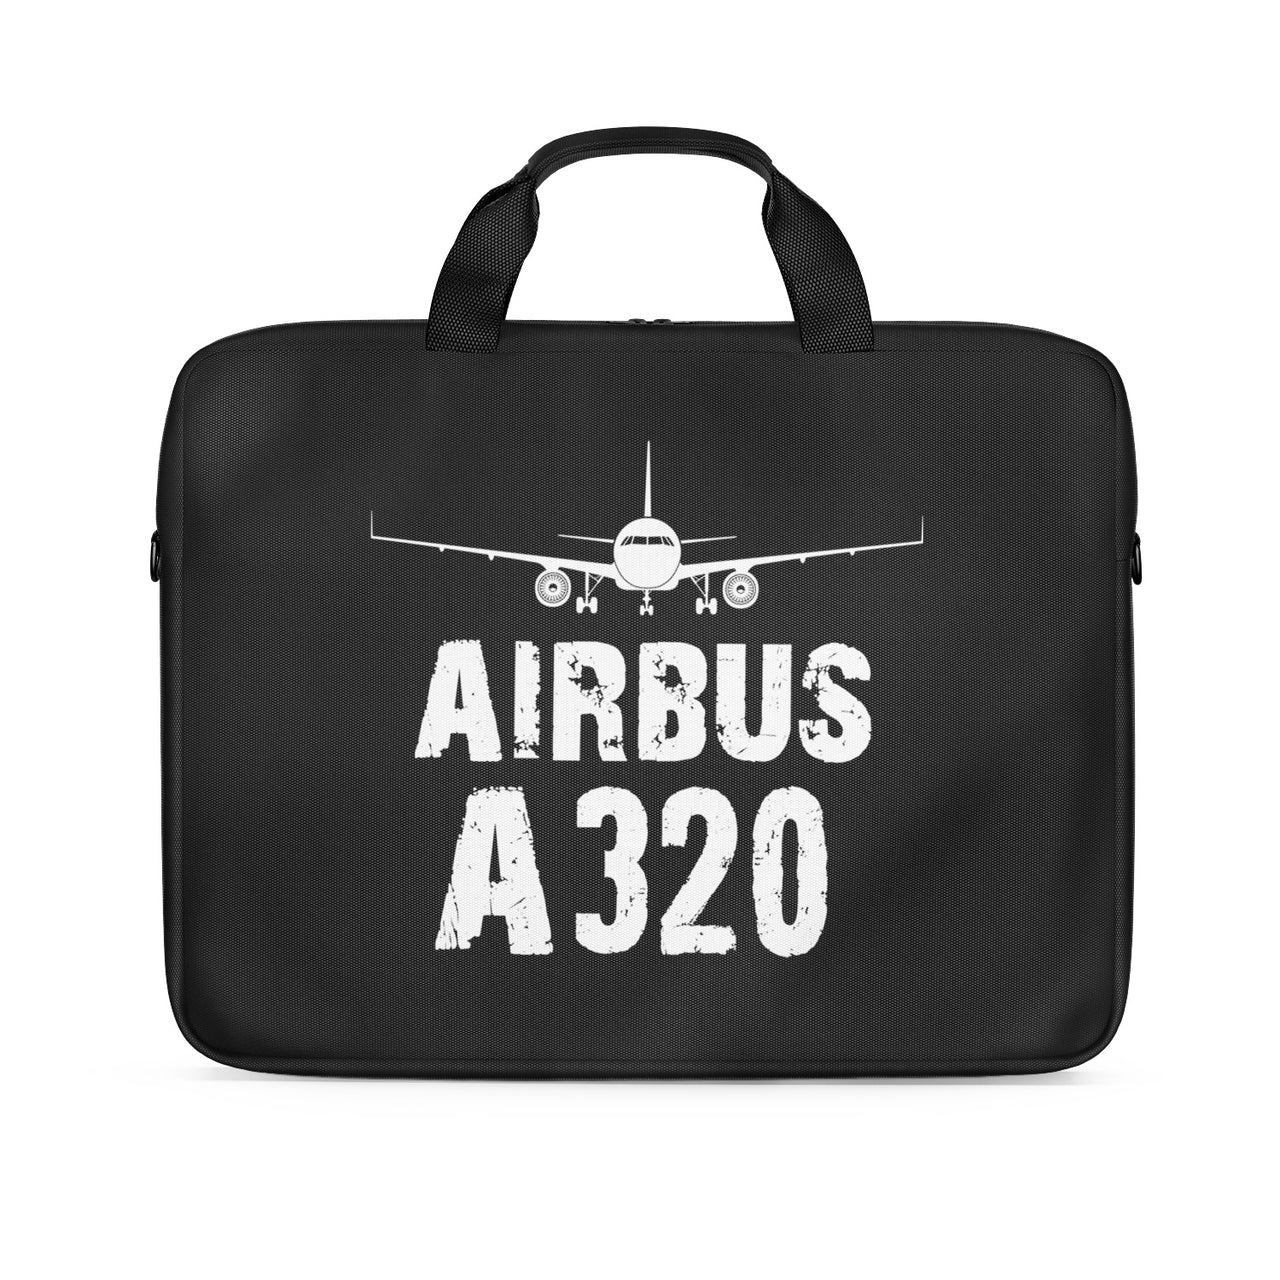 Airbus A320 & Plane Designed Laptop & Tablet Bags